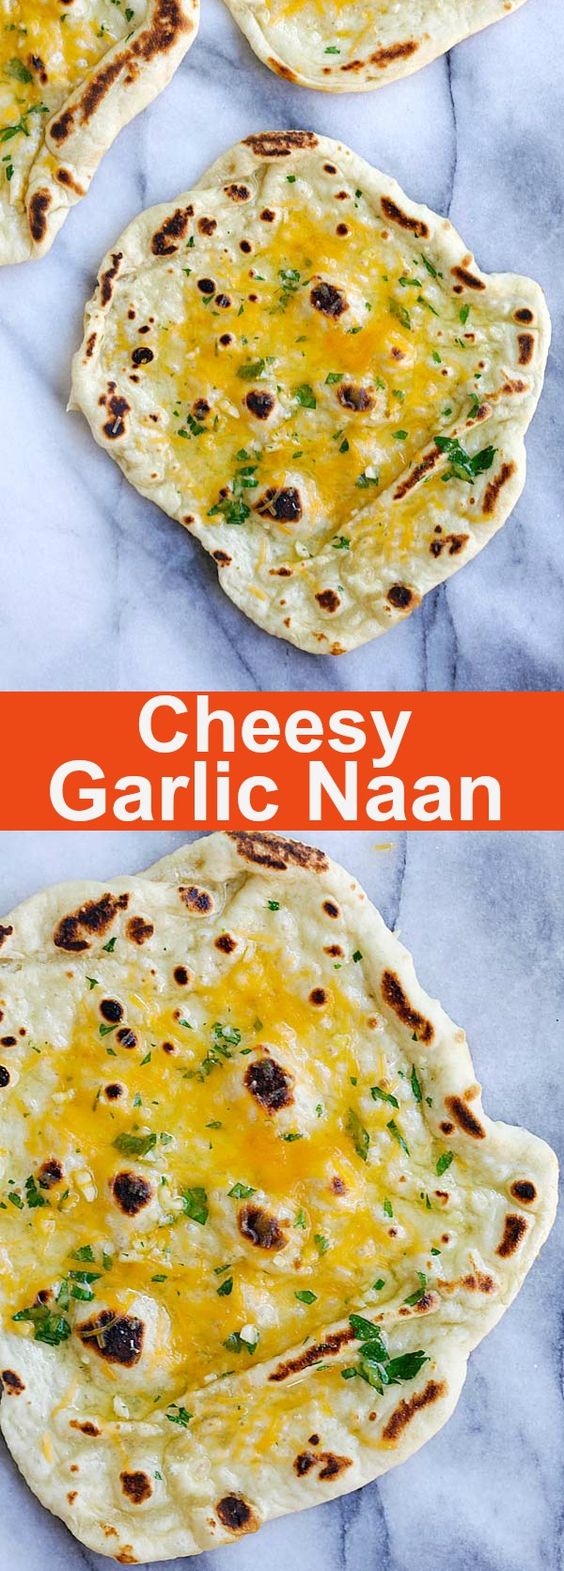 Cheesy Garlic Naan – homemade naan topped with garlic and cheddar cheese. Cheesy, buttery, garlicky naan that you can’t stop eating | rasamalaysia.com